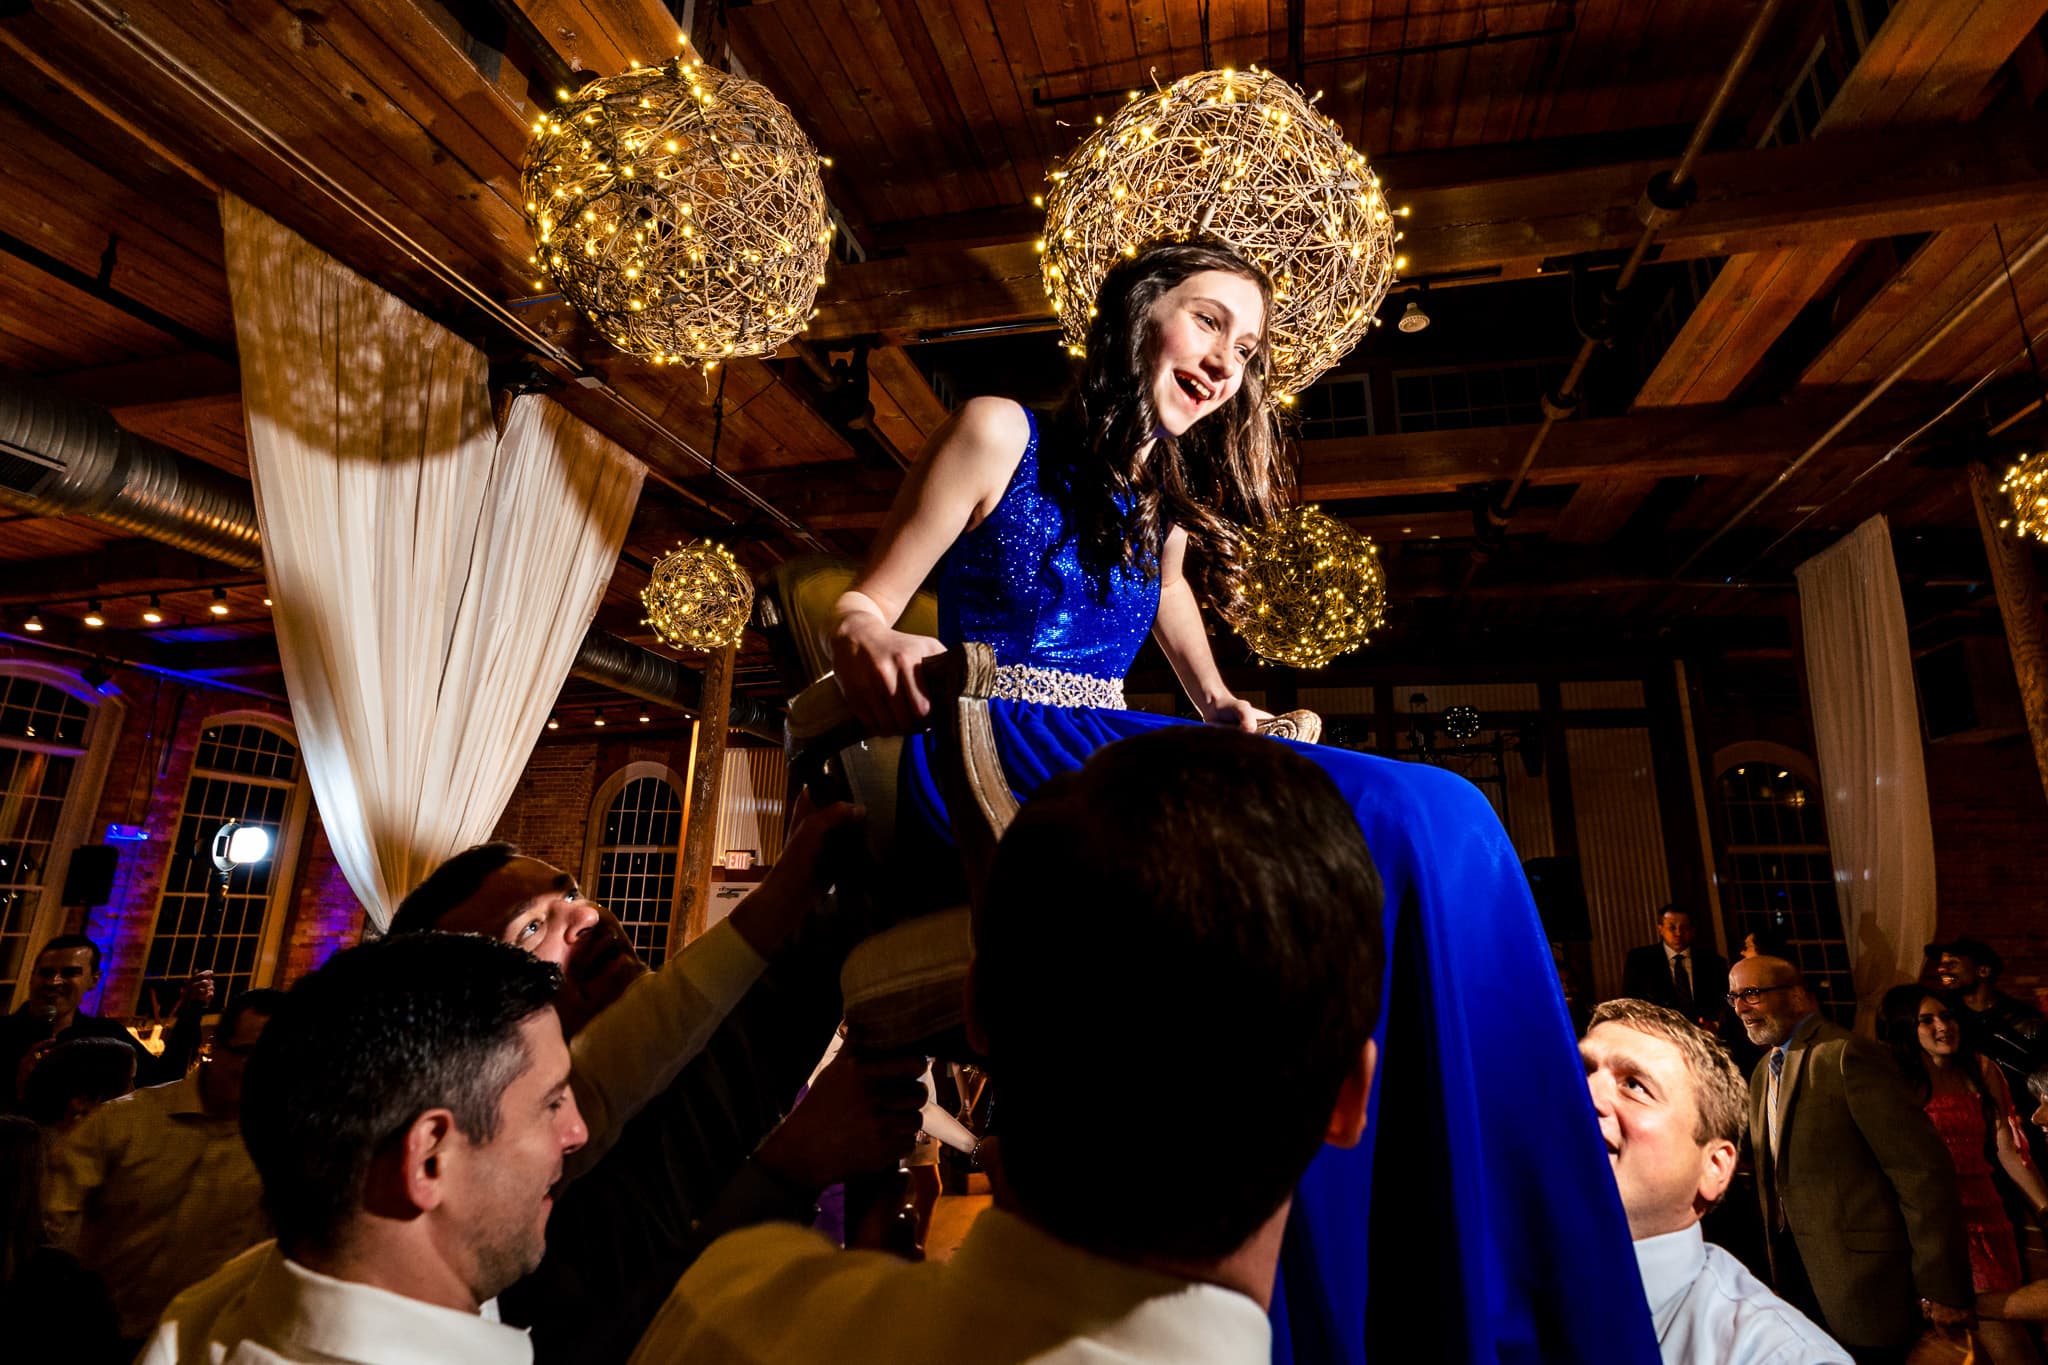 young woman in a blue dress is lifted in a chair during the hora at her bat mitzvah reception